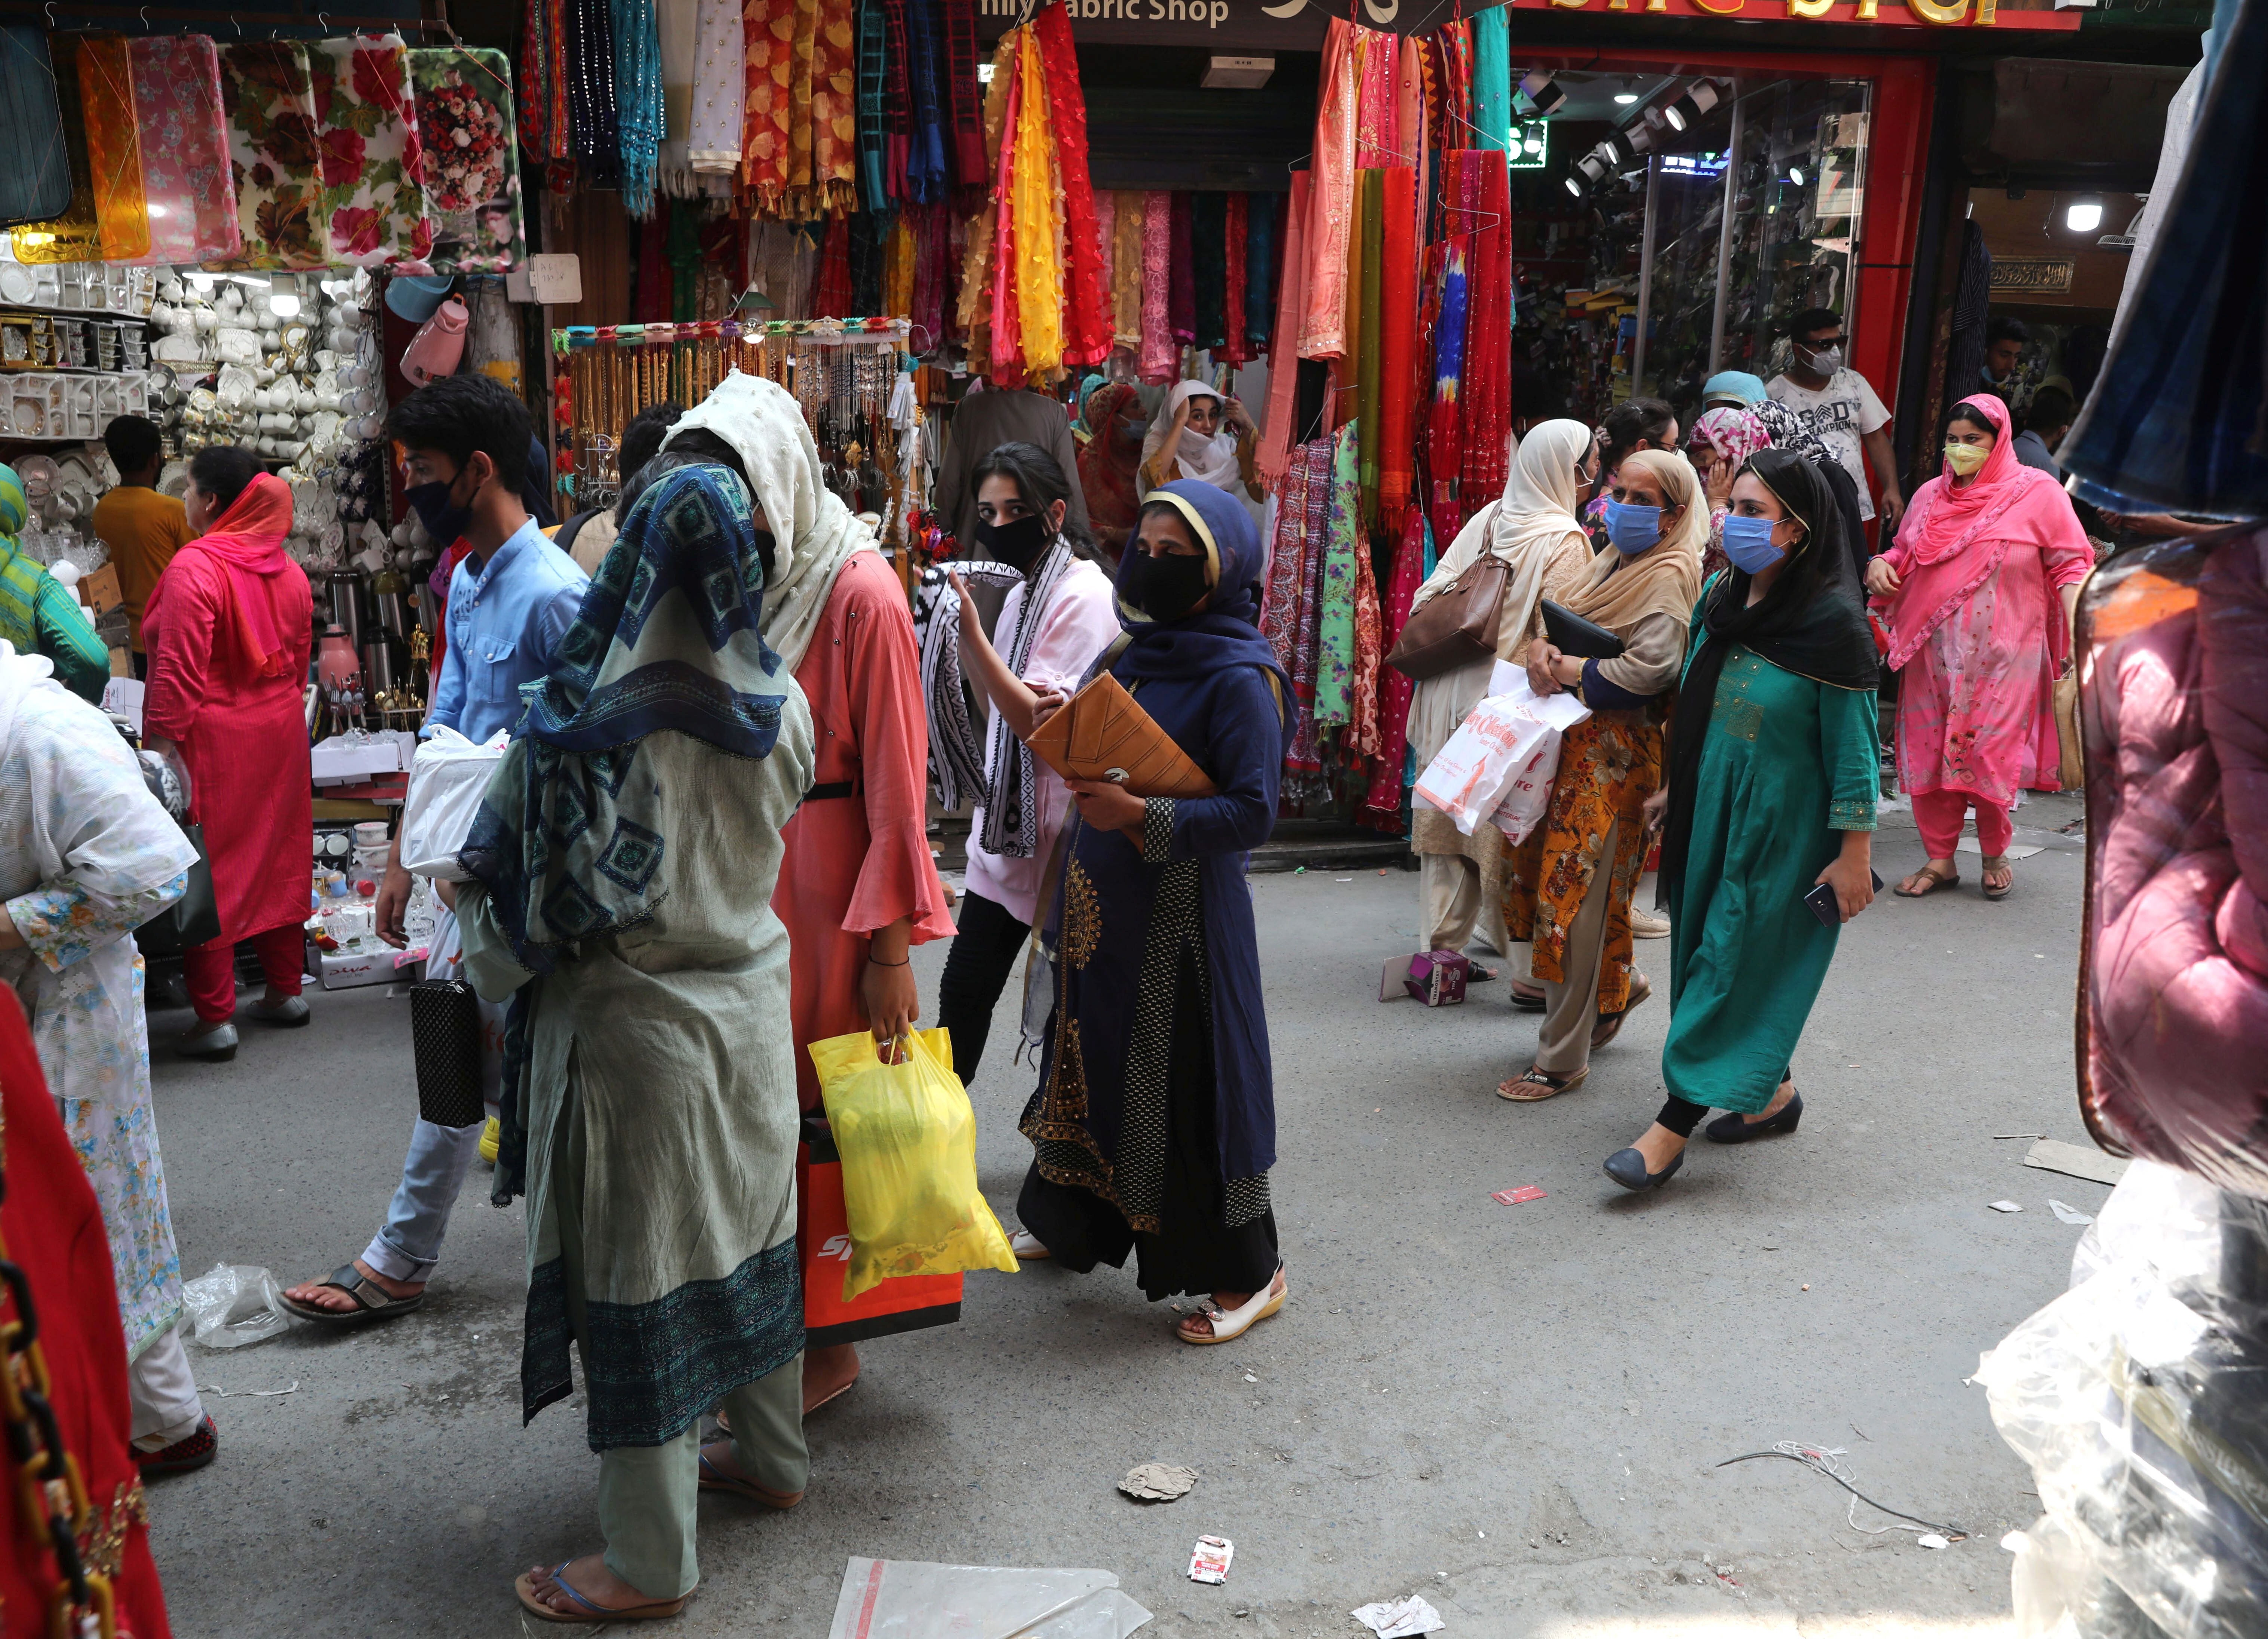 Women are seen shopping in Srinagar, the summer capital of Indian Kashmir, as coronavirus restrictions were eased ahead of the Eid-ul-Adha religious festival. Women have borne the brunt of the ongoing conflict in Kashmir. Photo: EPA